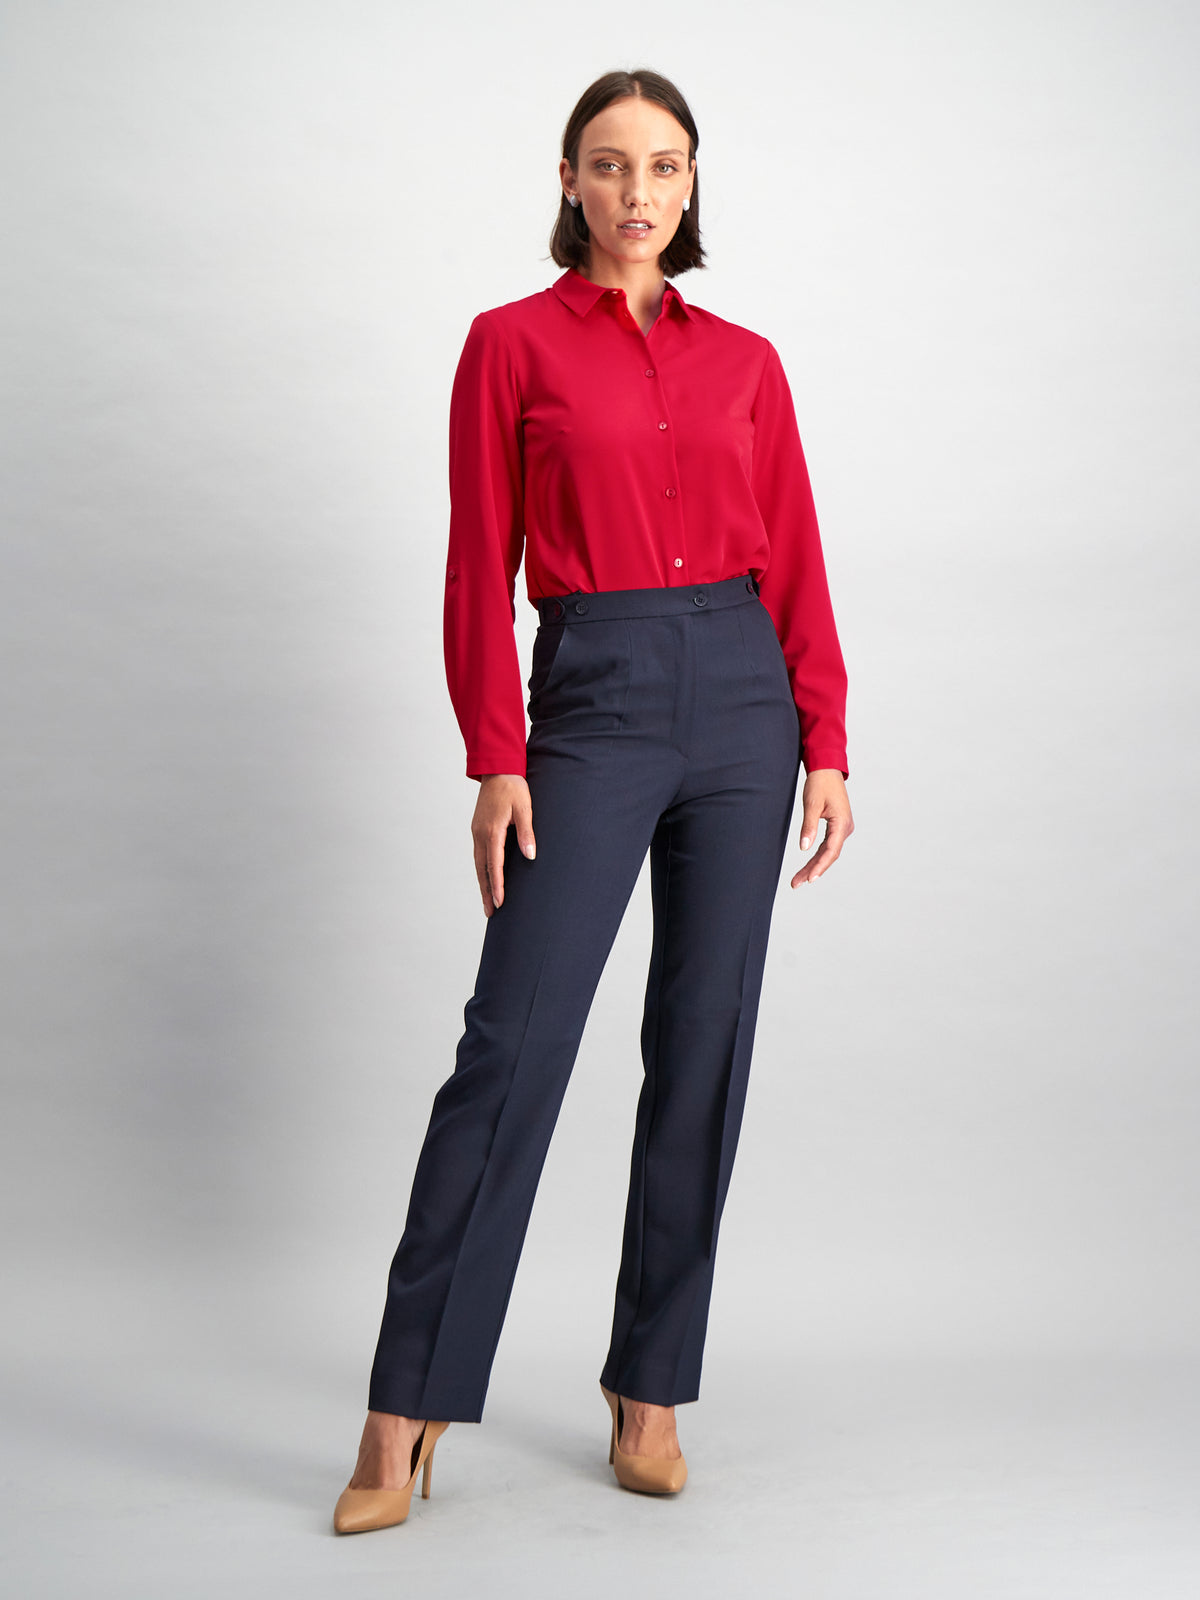 Cathy classic buttoned shirt - red